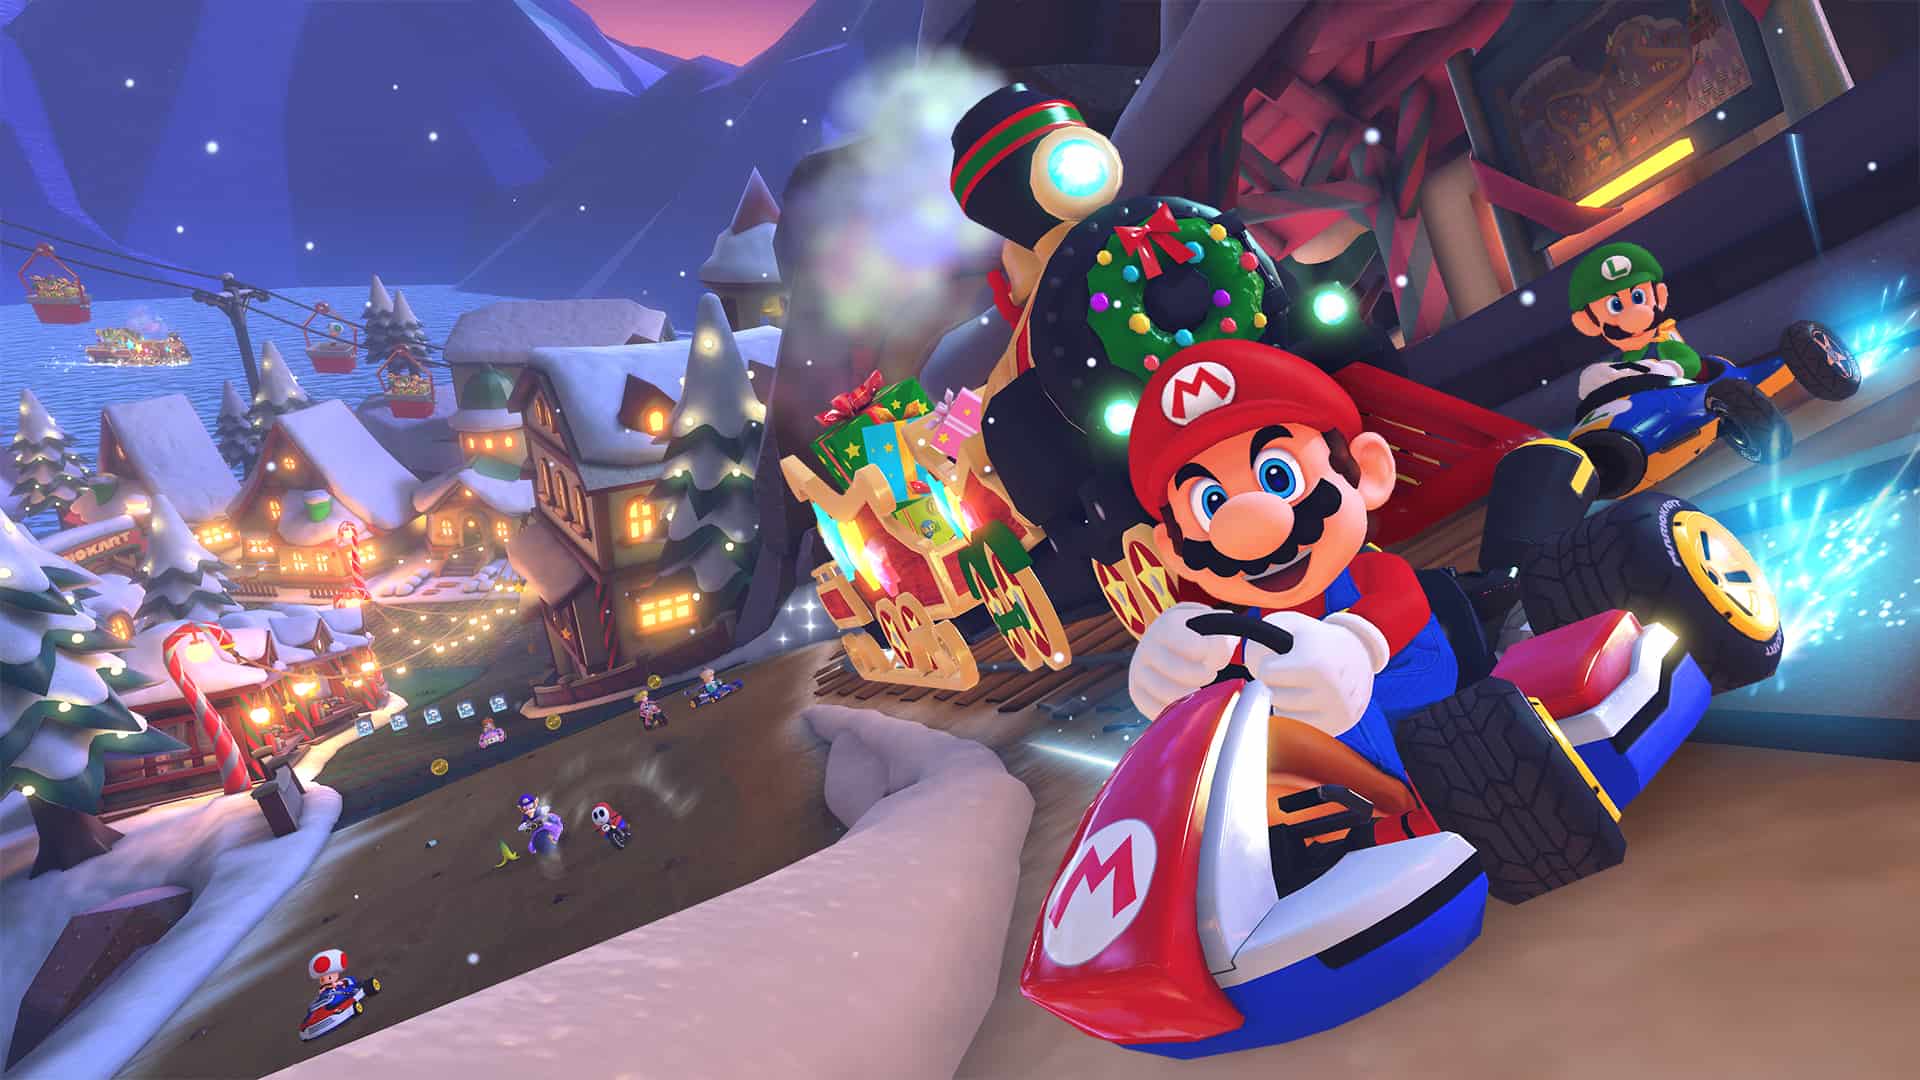 Booster Course Pass Wave 3 comes to Mario Kart 8 Deluxe this holiday season